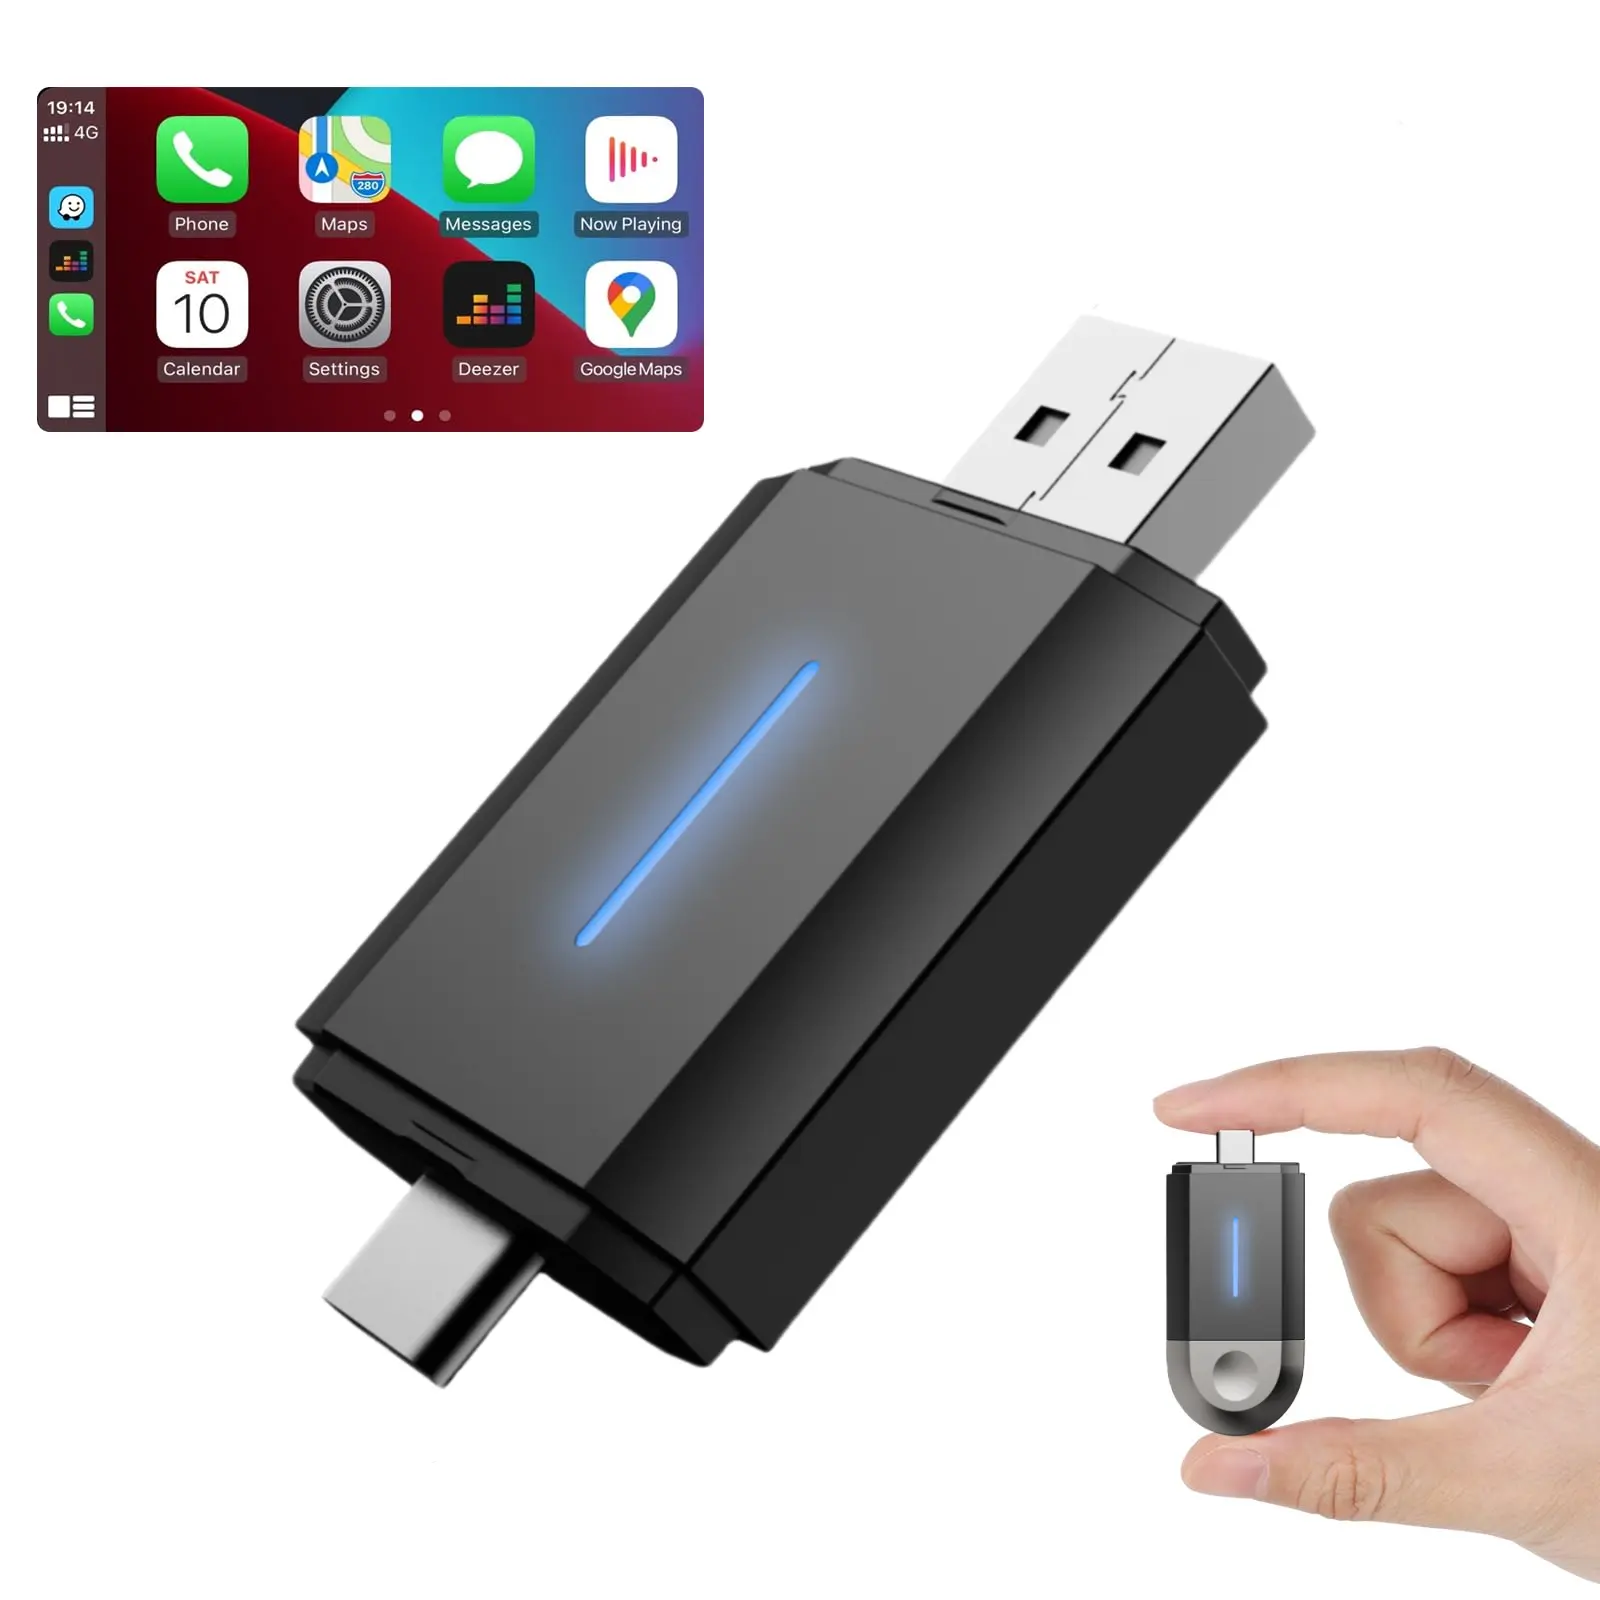 PhoebusLink 2-in-1 Portable Carplay Wireless Adapter Android Auto Dongle USB Type-C Ports Plug and Play Wireless CarPlay Adapter